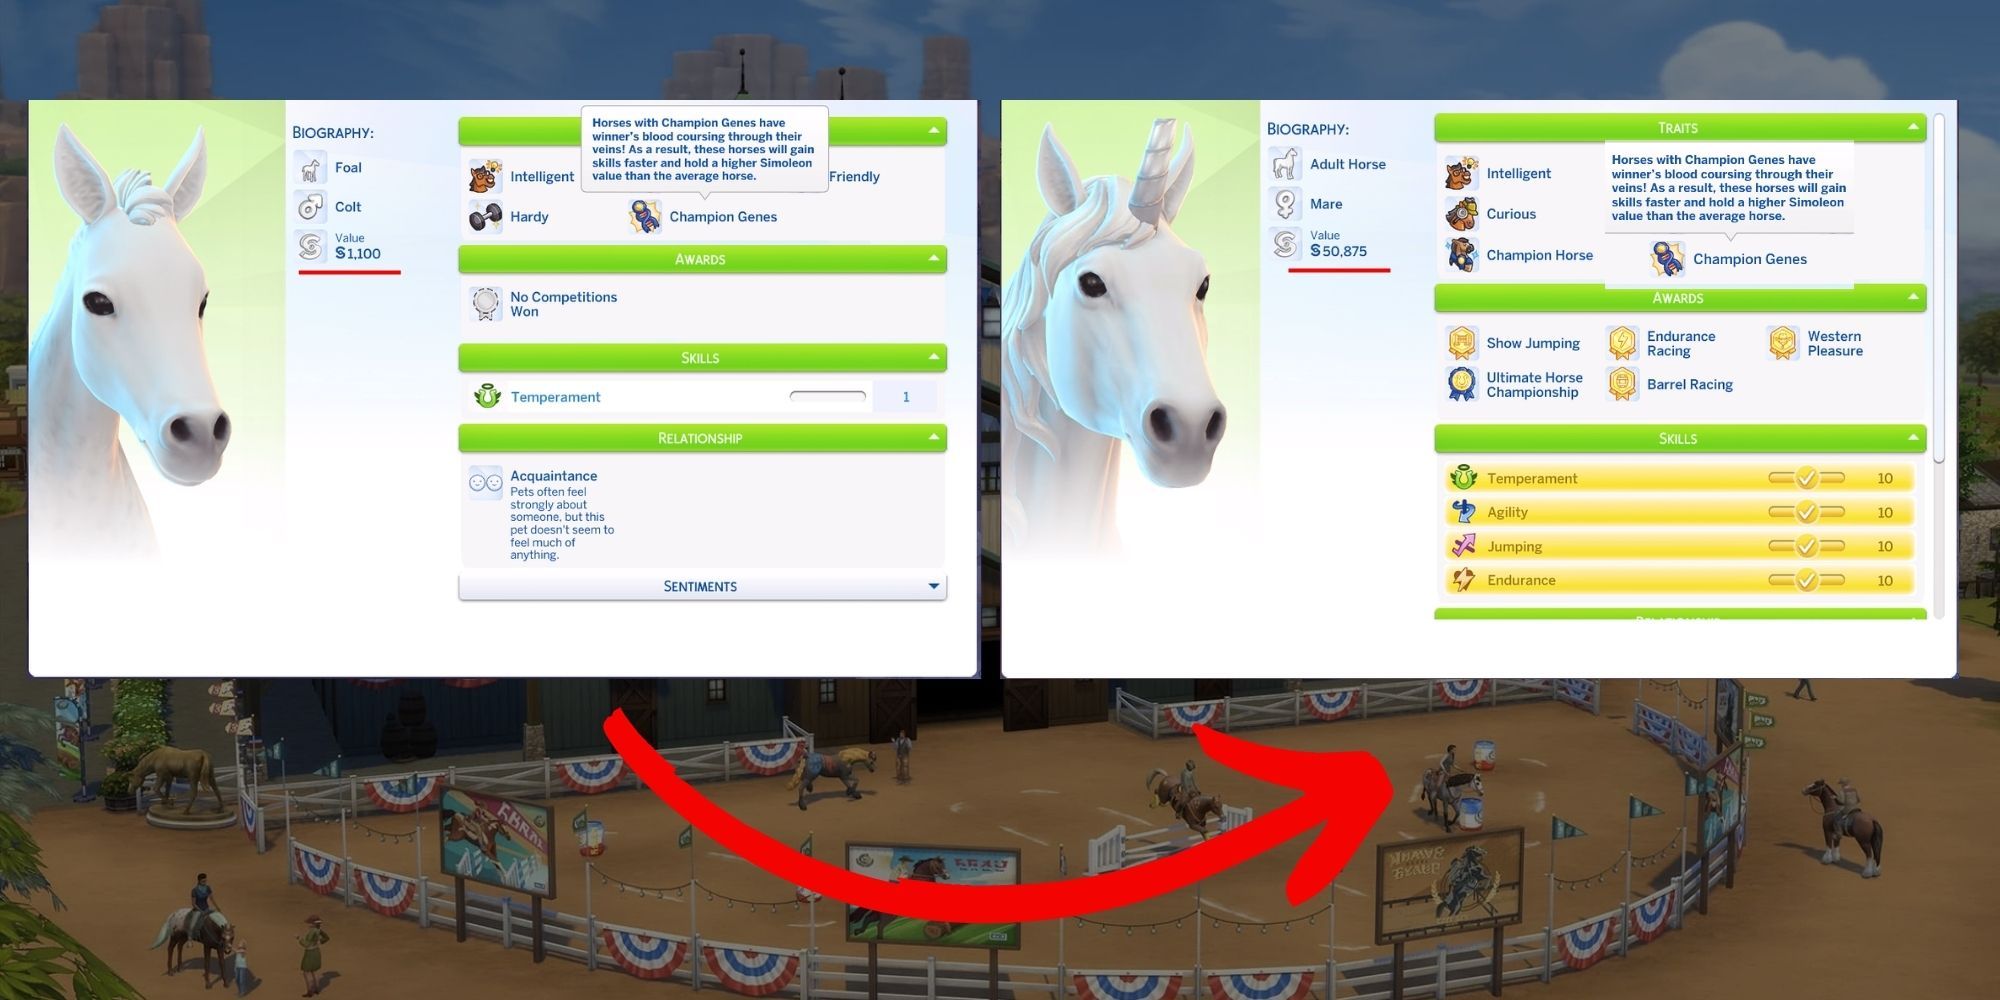 How To Use Horse Ranch Skills Cheats To Level Up & Max Out Horses Skills -  The Sims 4 